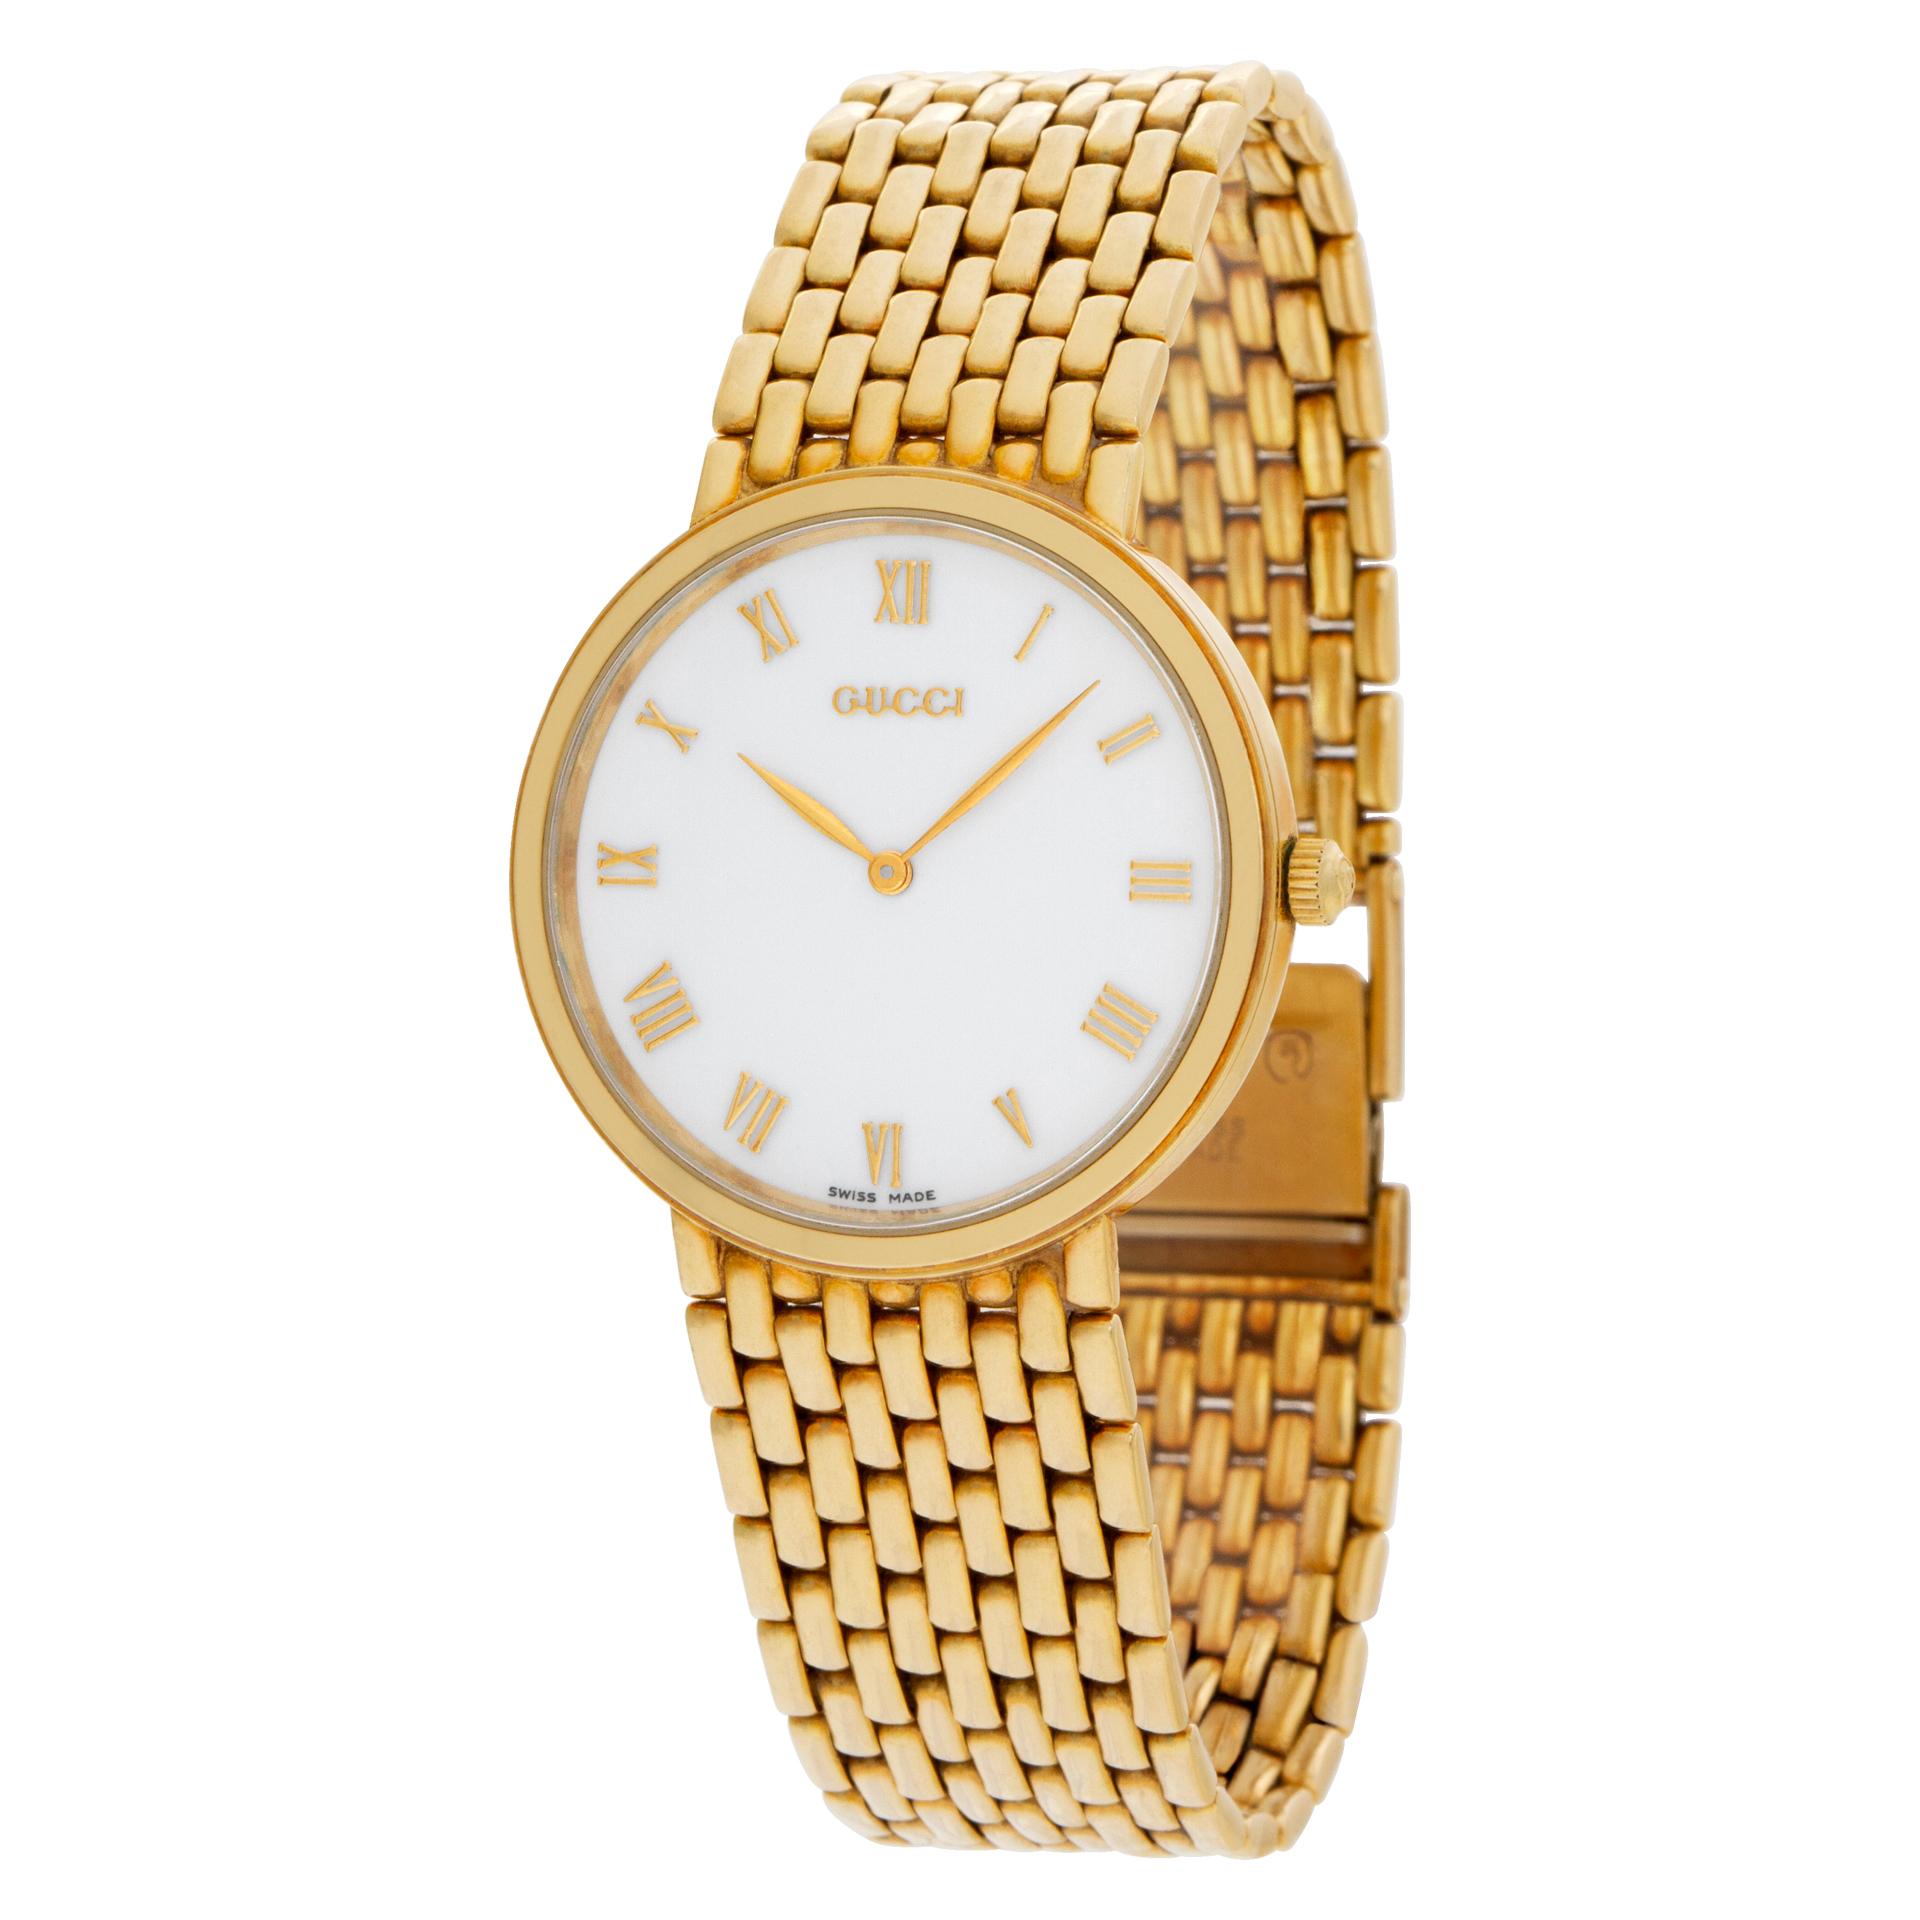 Gucci in 18k yellow gold on an 18k mesh bracelet. Fits a 7.25 inch wrist. Quartz. Ref 701M. 33mm case size. Circa 2000s. Fine Pre-owned Gucci Watch. Certified preowned Classic Gucci Classic 701M watch is made out of yellow gold on a 18k bracelet